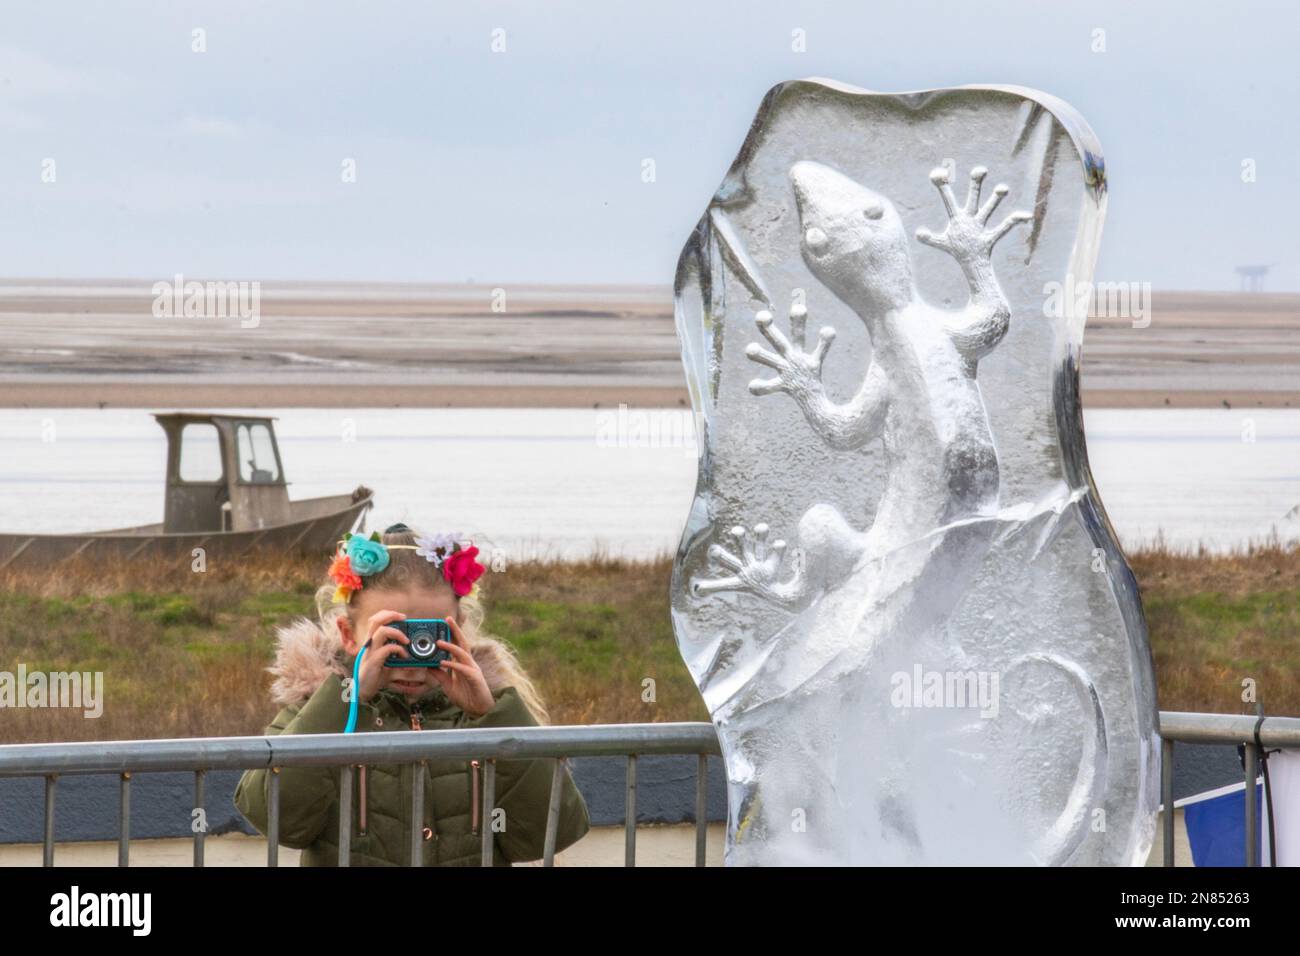 Lytham St. Annes, Lancashire. 11 Feb 2023 Ice sculpting festival. Marvellous ice sculptures at Lytham's lost concrete mussel tanks, Glacial Art Ice Sculptures carve animals, characters and mystical creatures, sand lizards & designs out of huge blocks of ice. Credit; MediaWorldImages/AlamyLiveNews Stock Photo